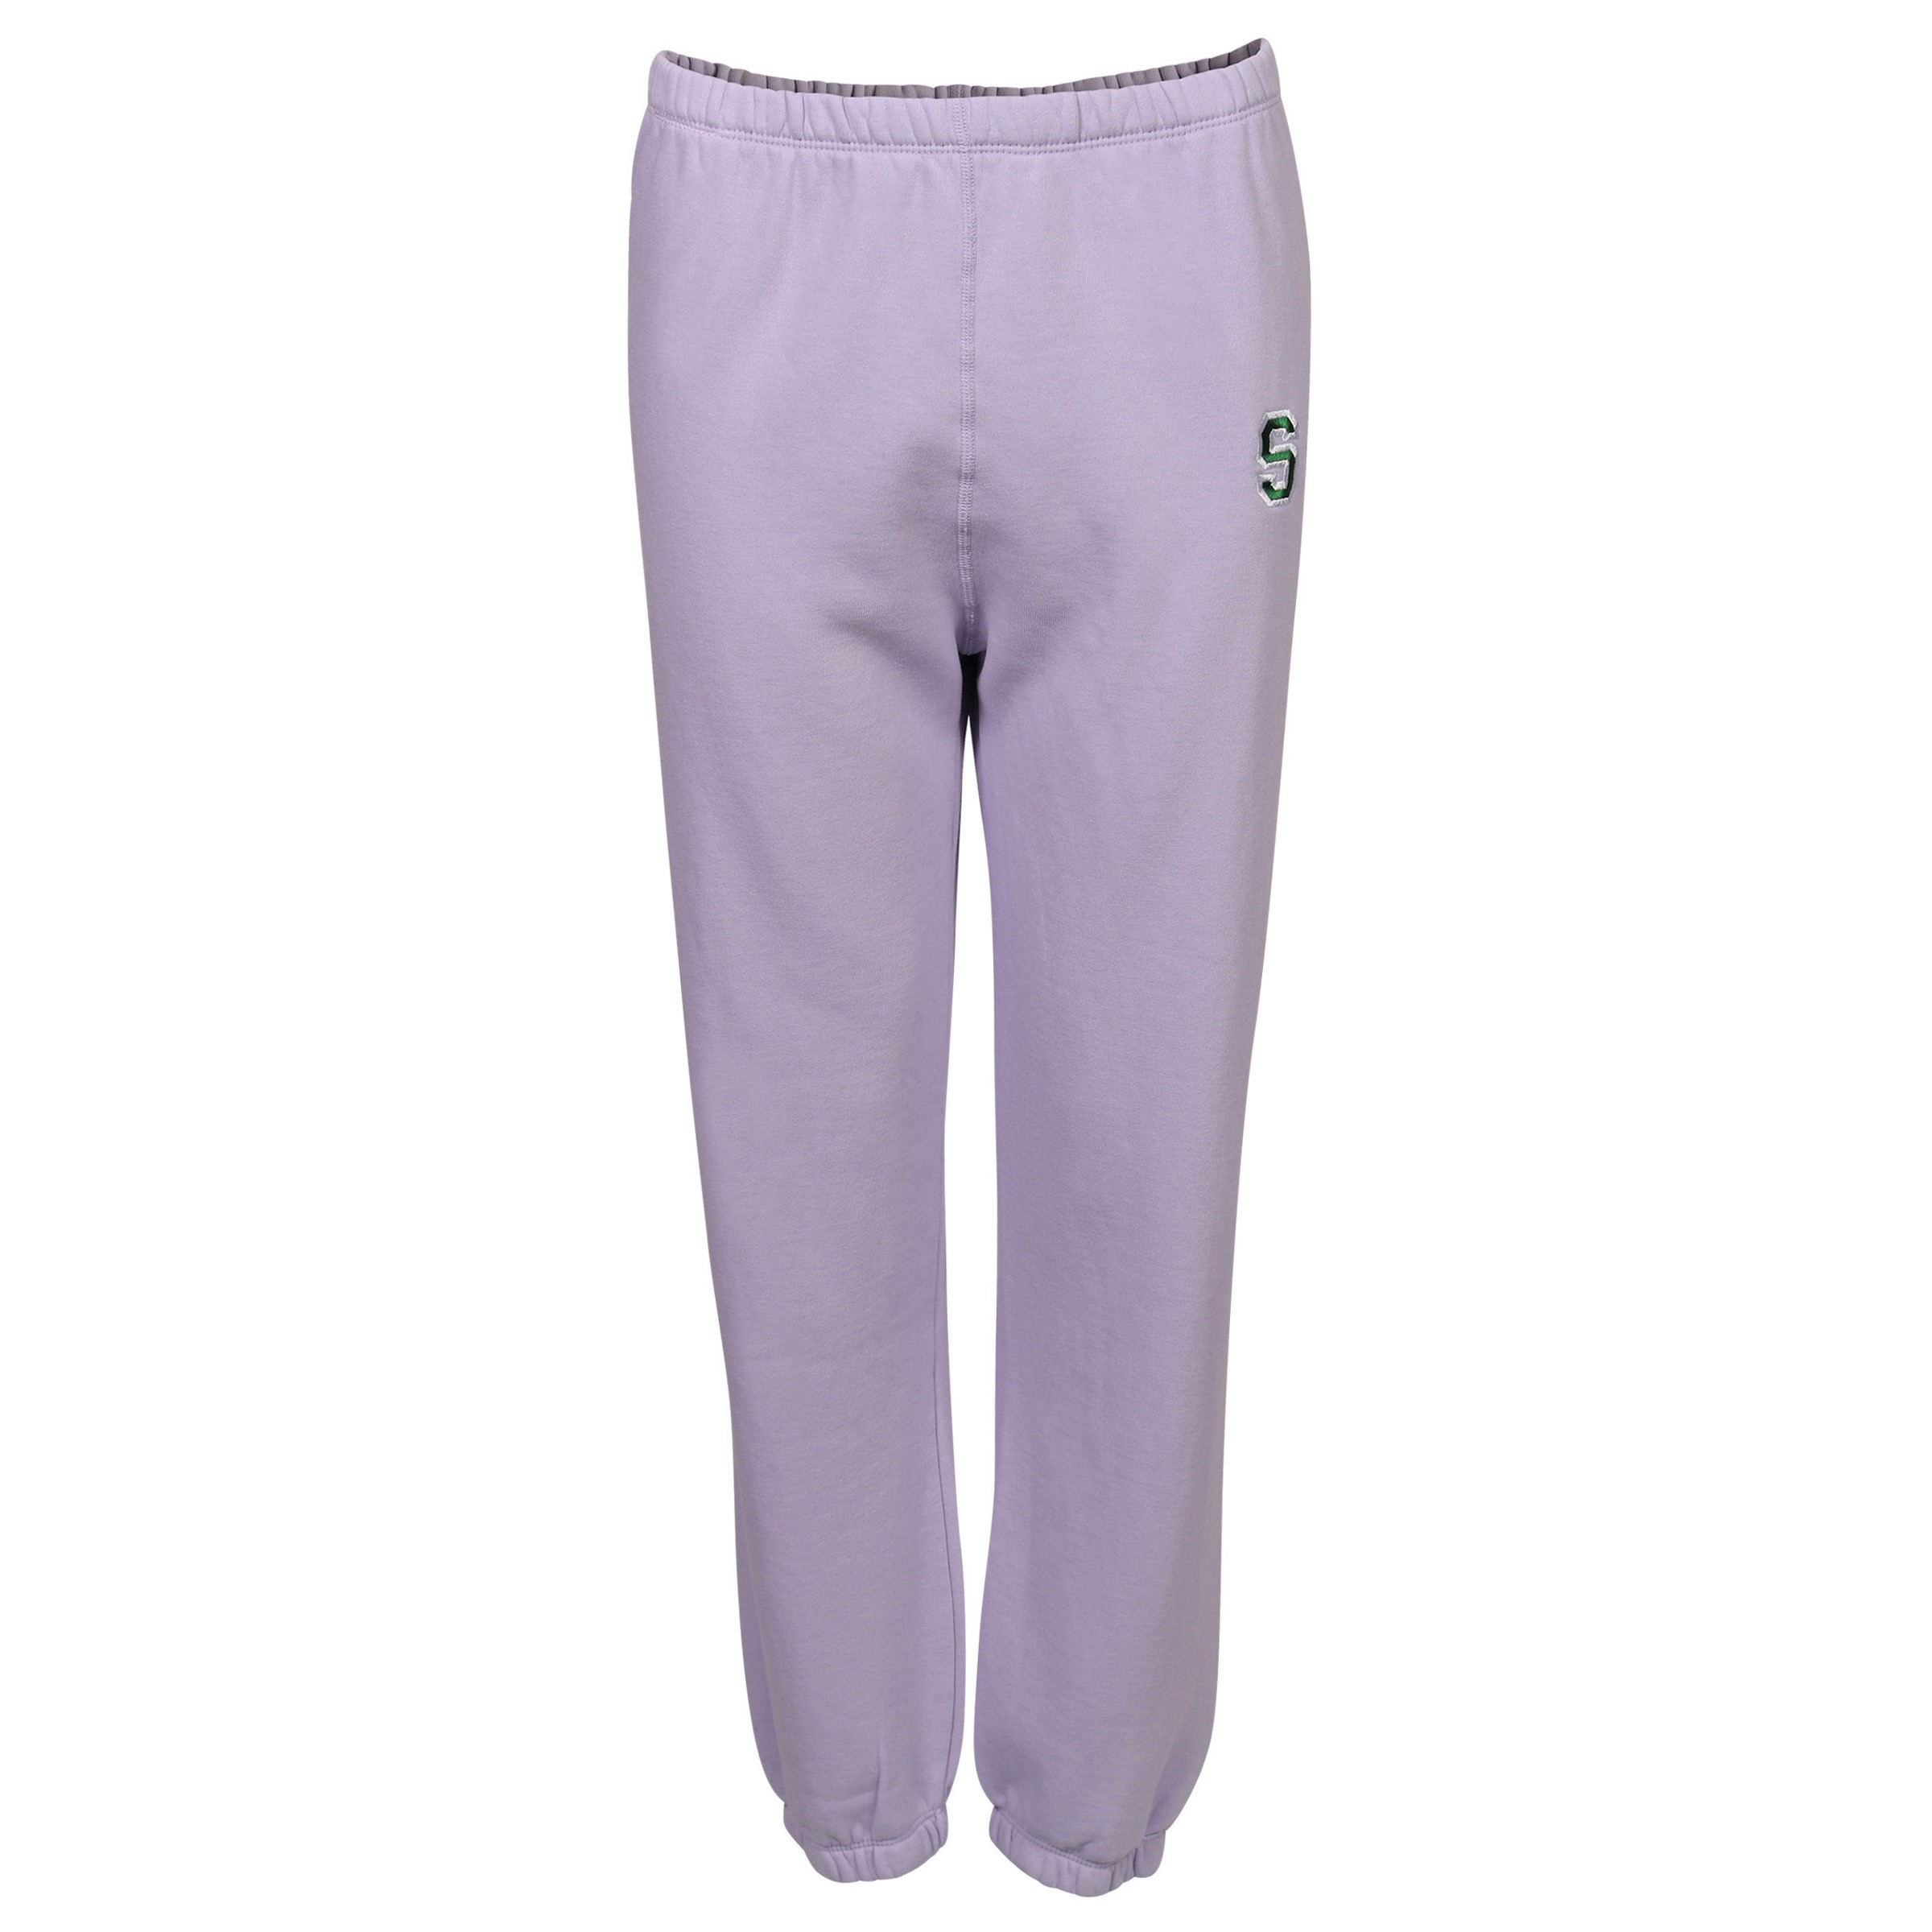 SPRWMN Embroidereed Logo Sweatpant in Lavender